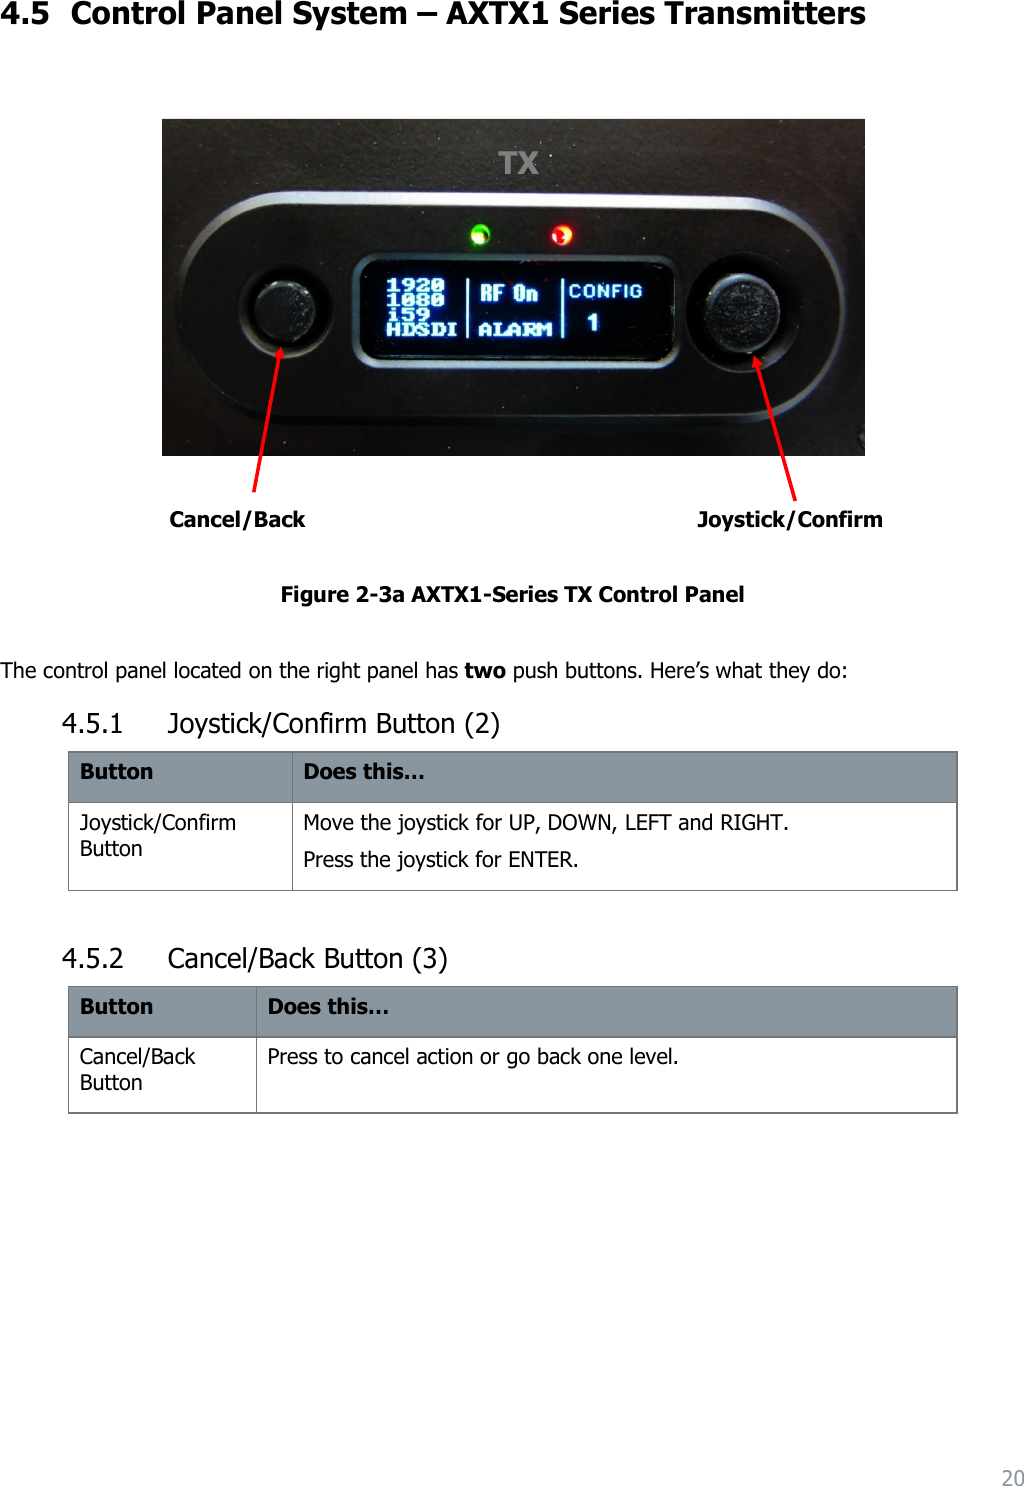 20  4.5 Control Panel System – AXTX1 Series Transmitters           Cancel/Back                              Joystick/Confirm  Figure 2-3a AXTX1-Series TX Control Panel  The control panel located on the right panel has two push buttons. Here’s what they do: 4.5.1 Joystick/Confirm Button (2) Button Does this… Joystick/Confirm Button Move the joystick for UP, DOWN, LEFT and RIGHT. Press the joystick for ENTER.  4.5.2 Cancel/Back Button (3) Button Does this… Cancel/Back Button Press to cancel action or go back one level. TX 